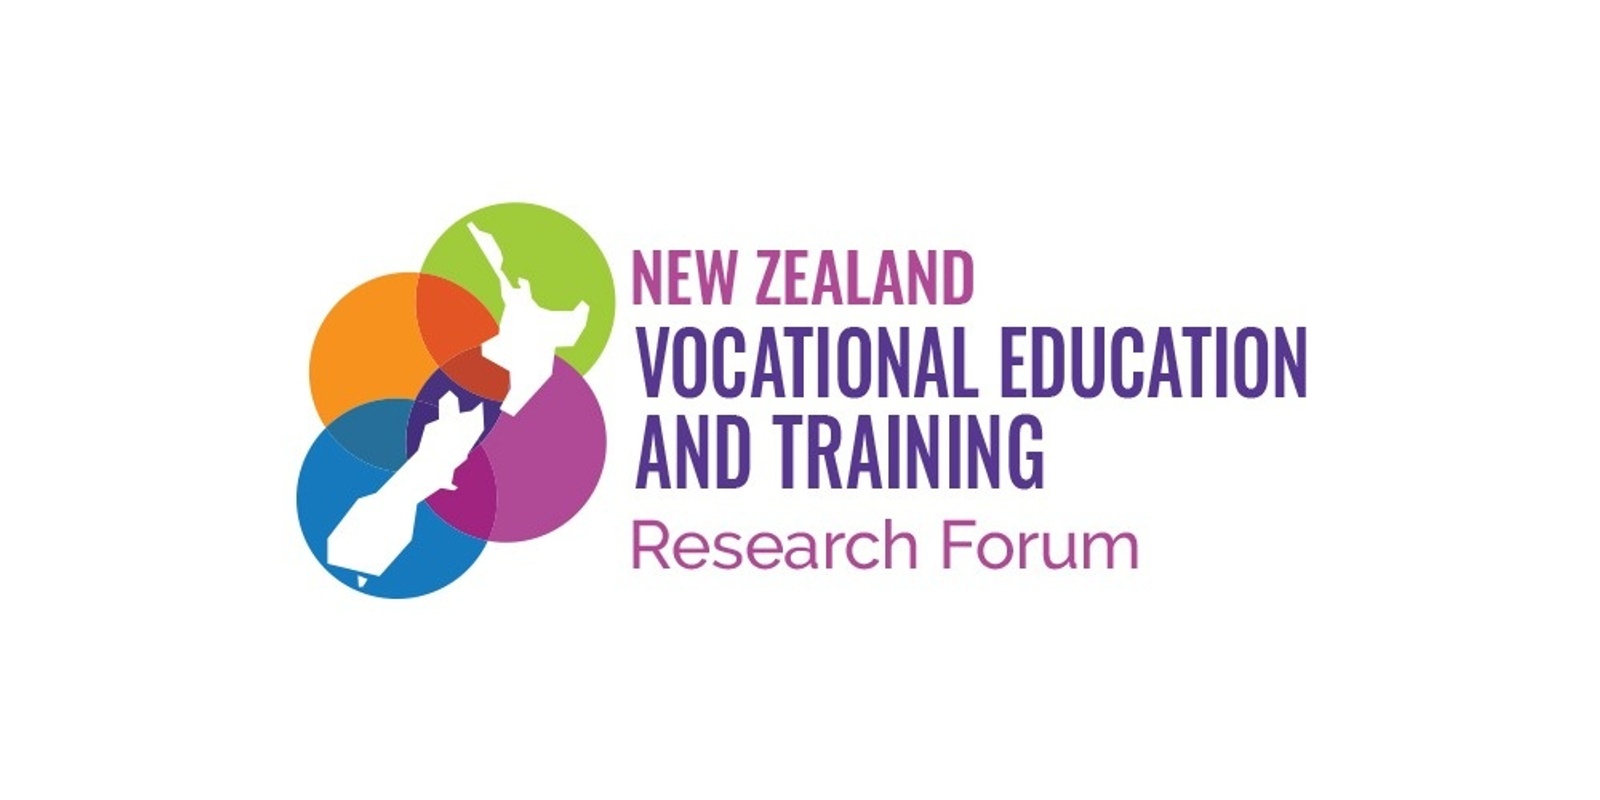 New Zealand Vocational Education and Training Research Forum (NZVETRF)